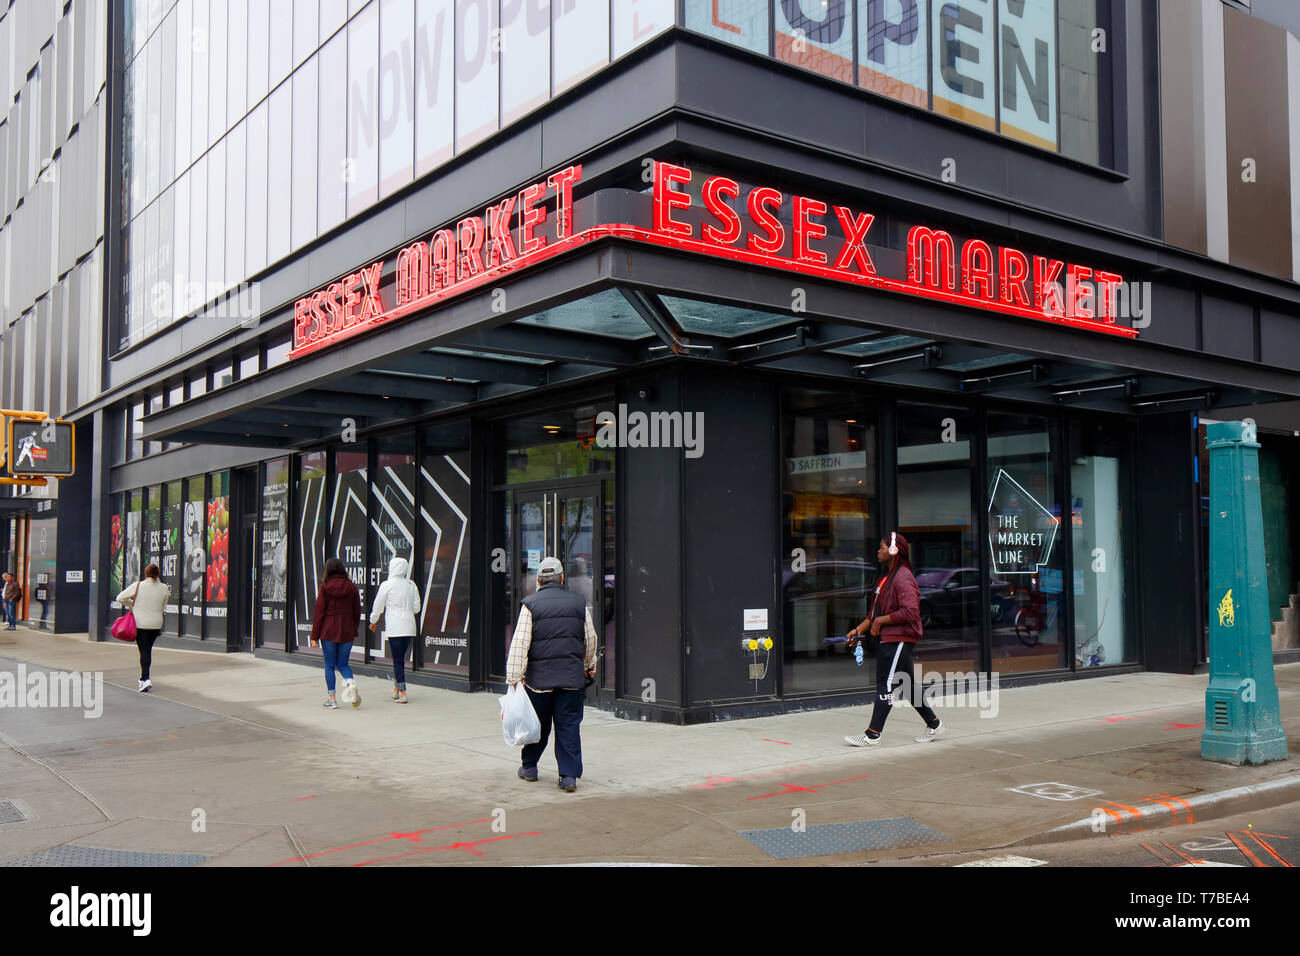 Essex Market, May 2019.  Lower East Side, New York City Stock Photo